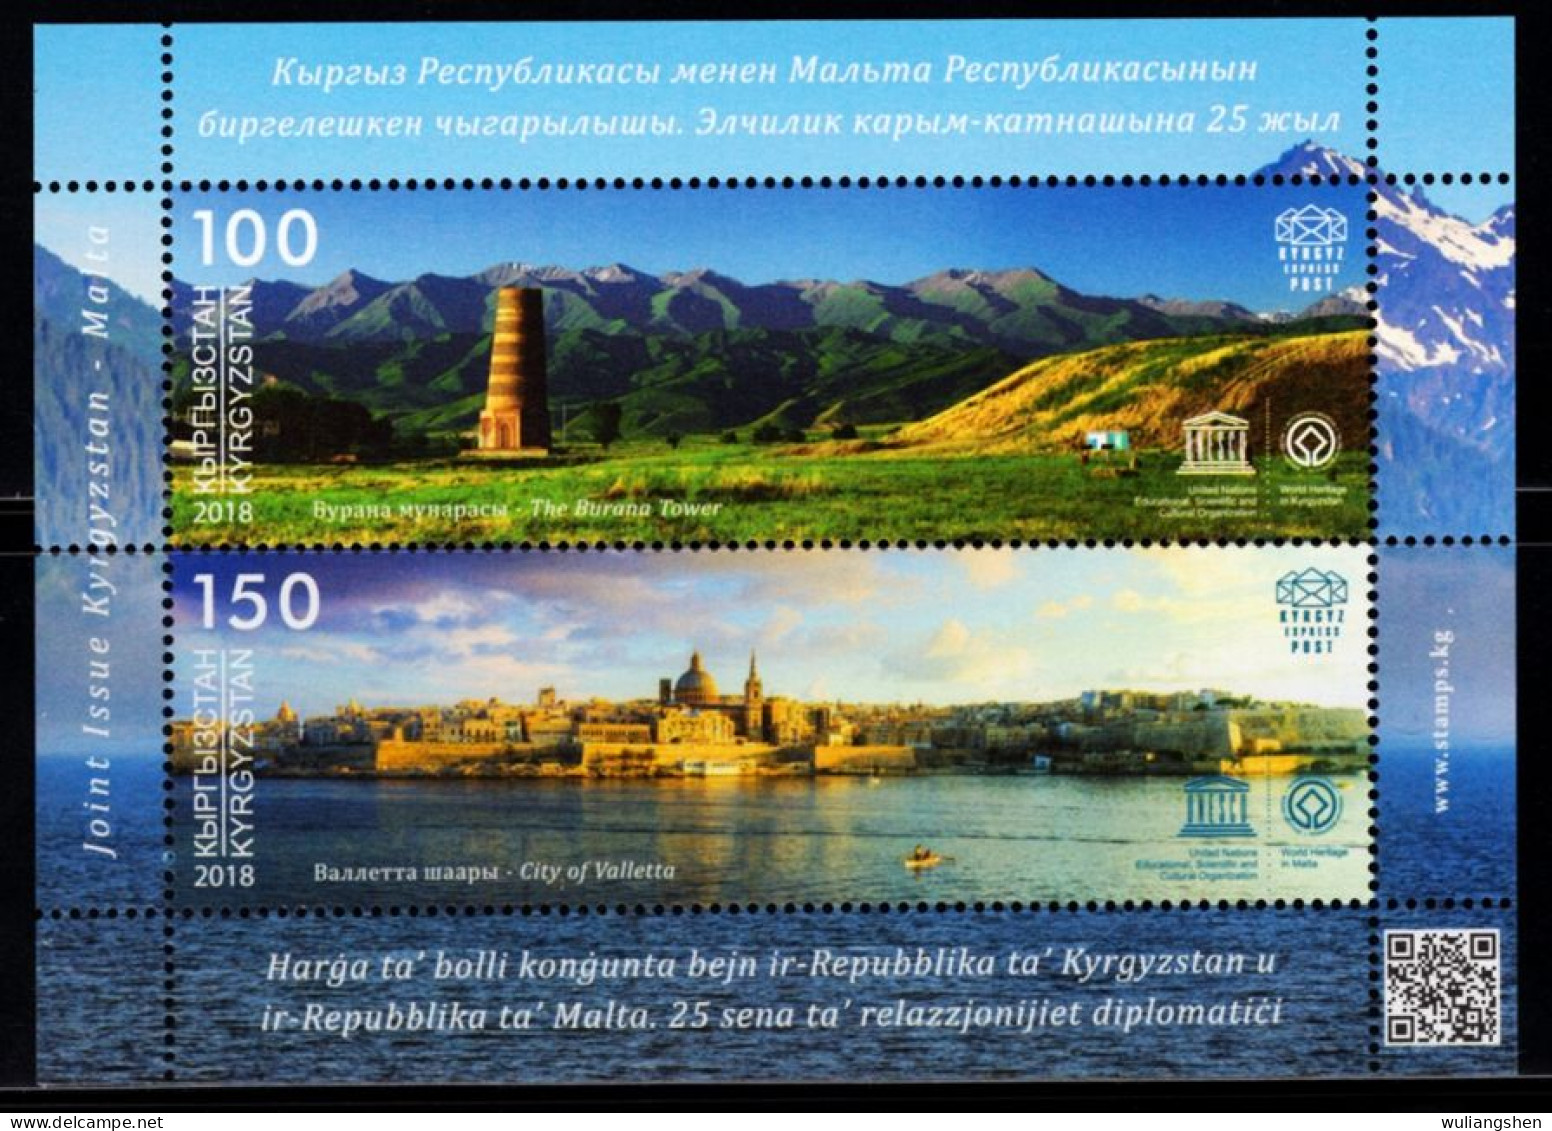 XK0256 List Of Architectural Heritage In Kyrgyzstan And Malta In 2018 MNH - Kirgisistan